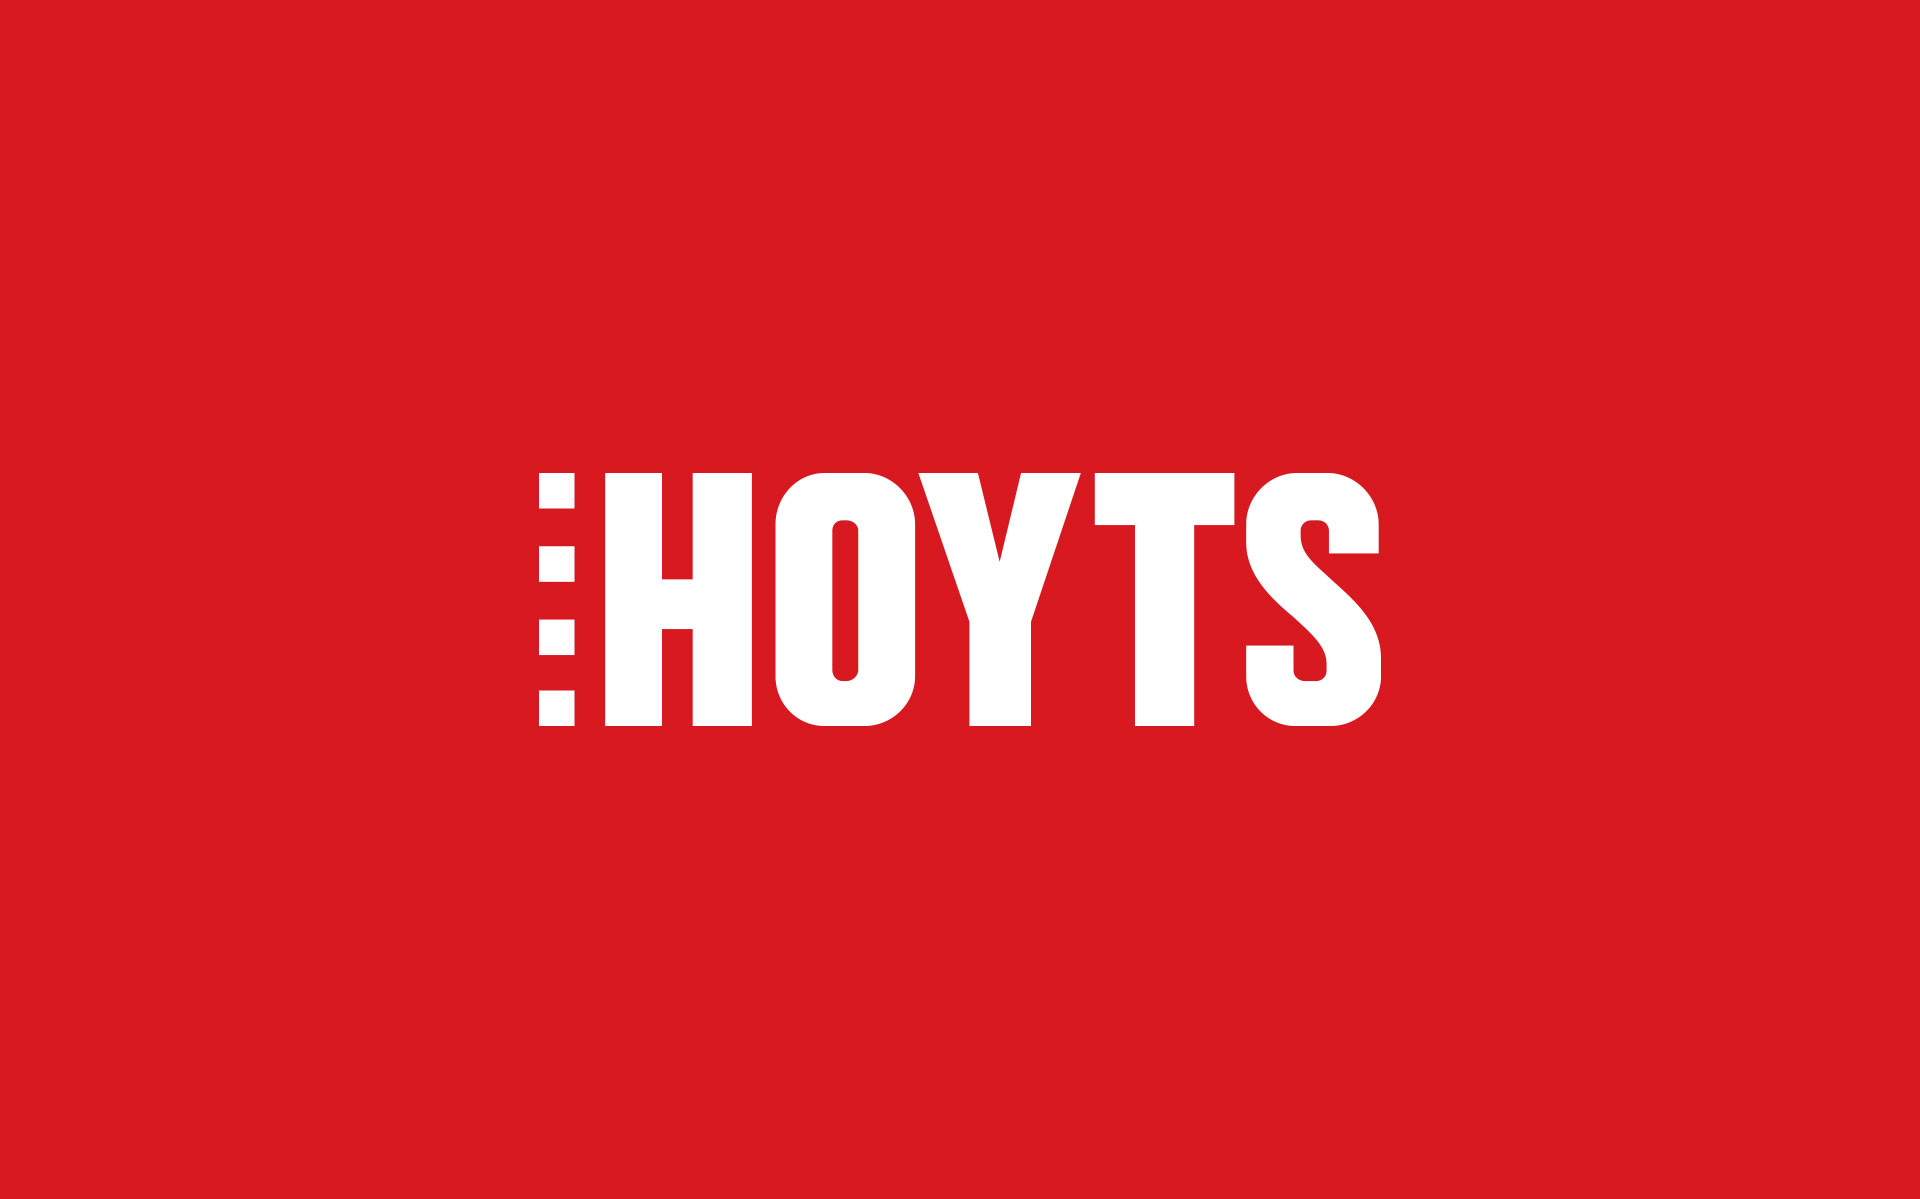 HOYTS branding, marketing, publications & online work designed by Amy at Yellow Sunday